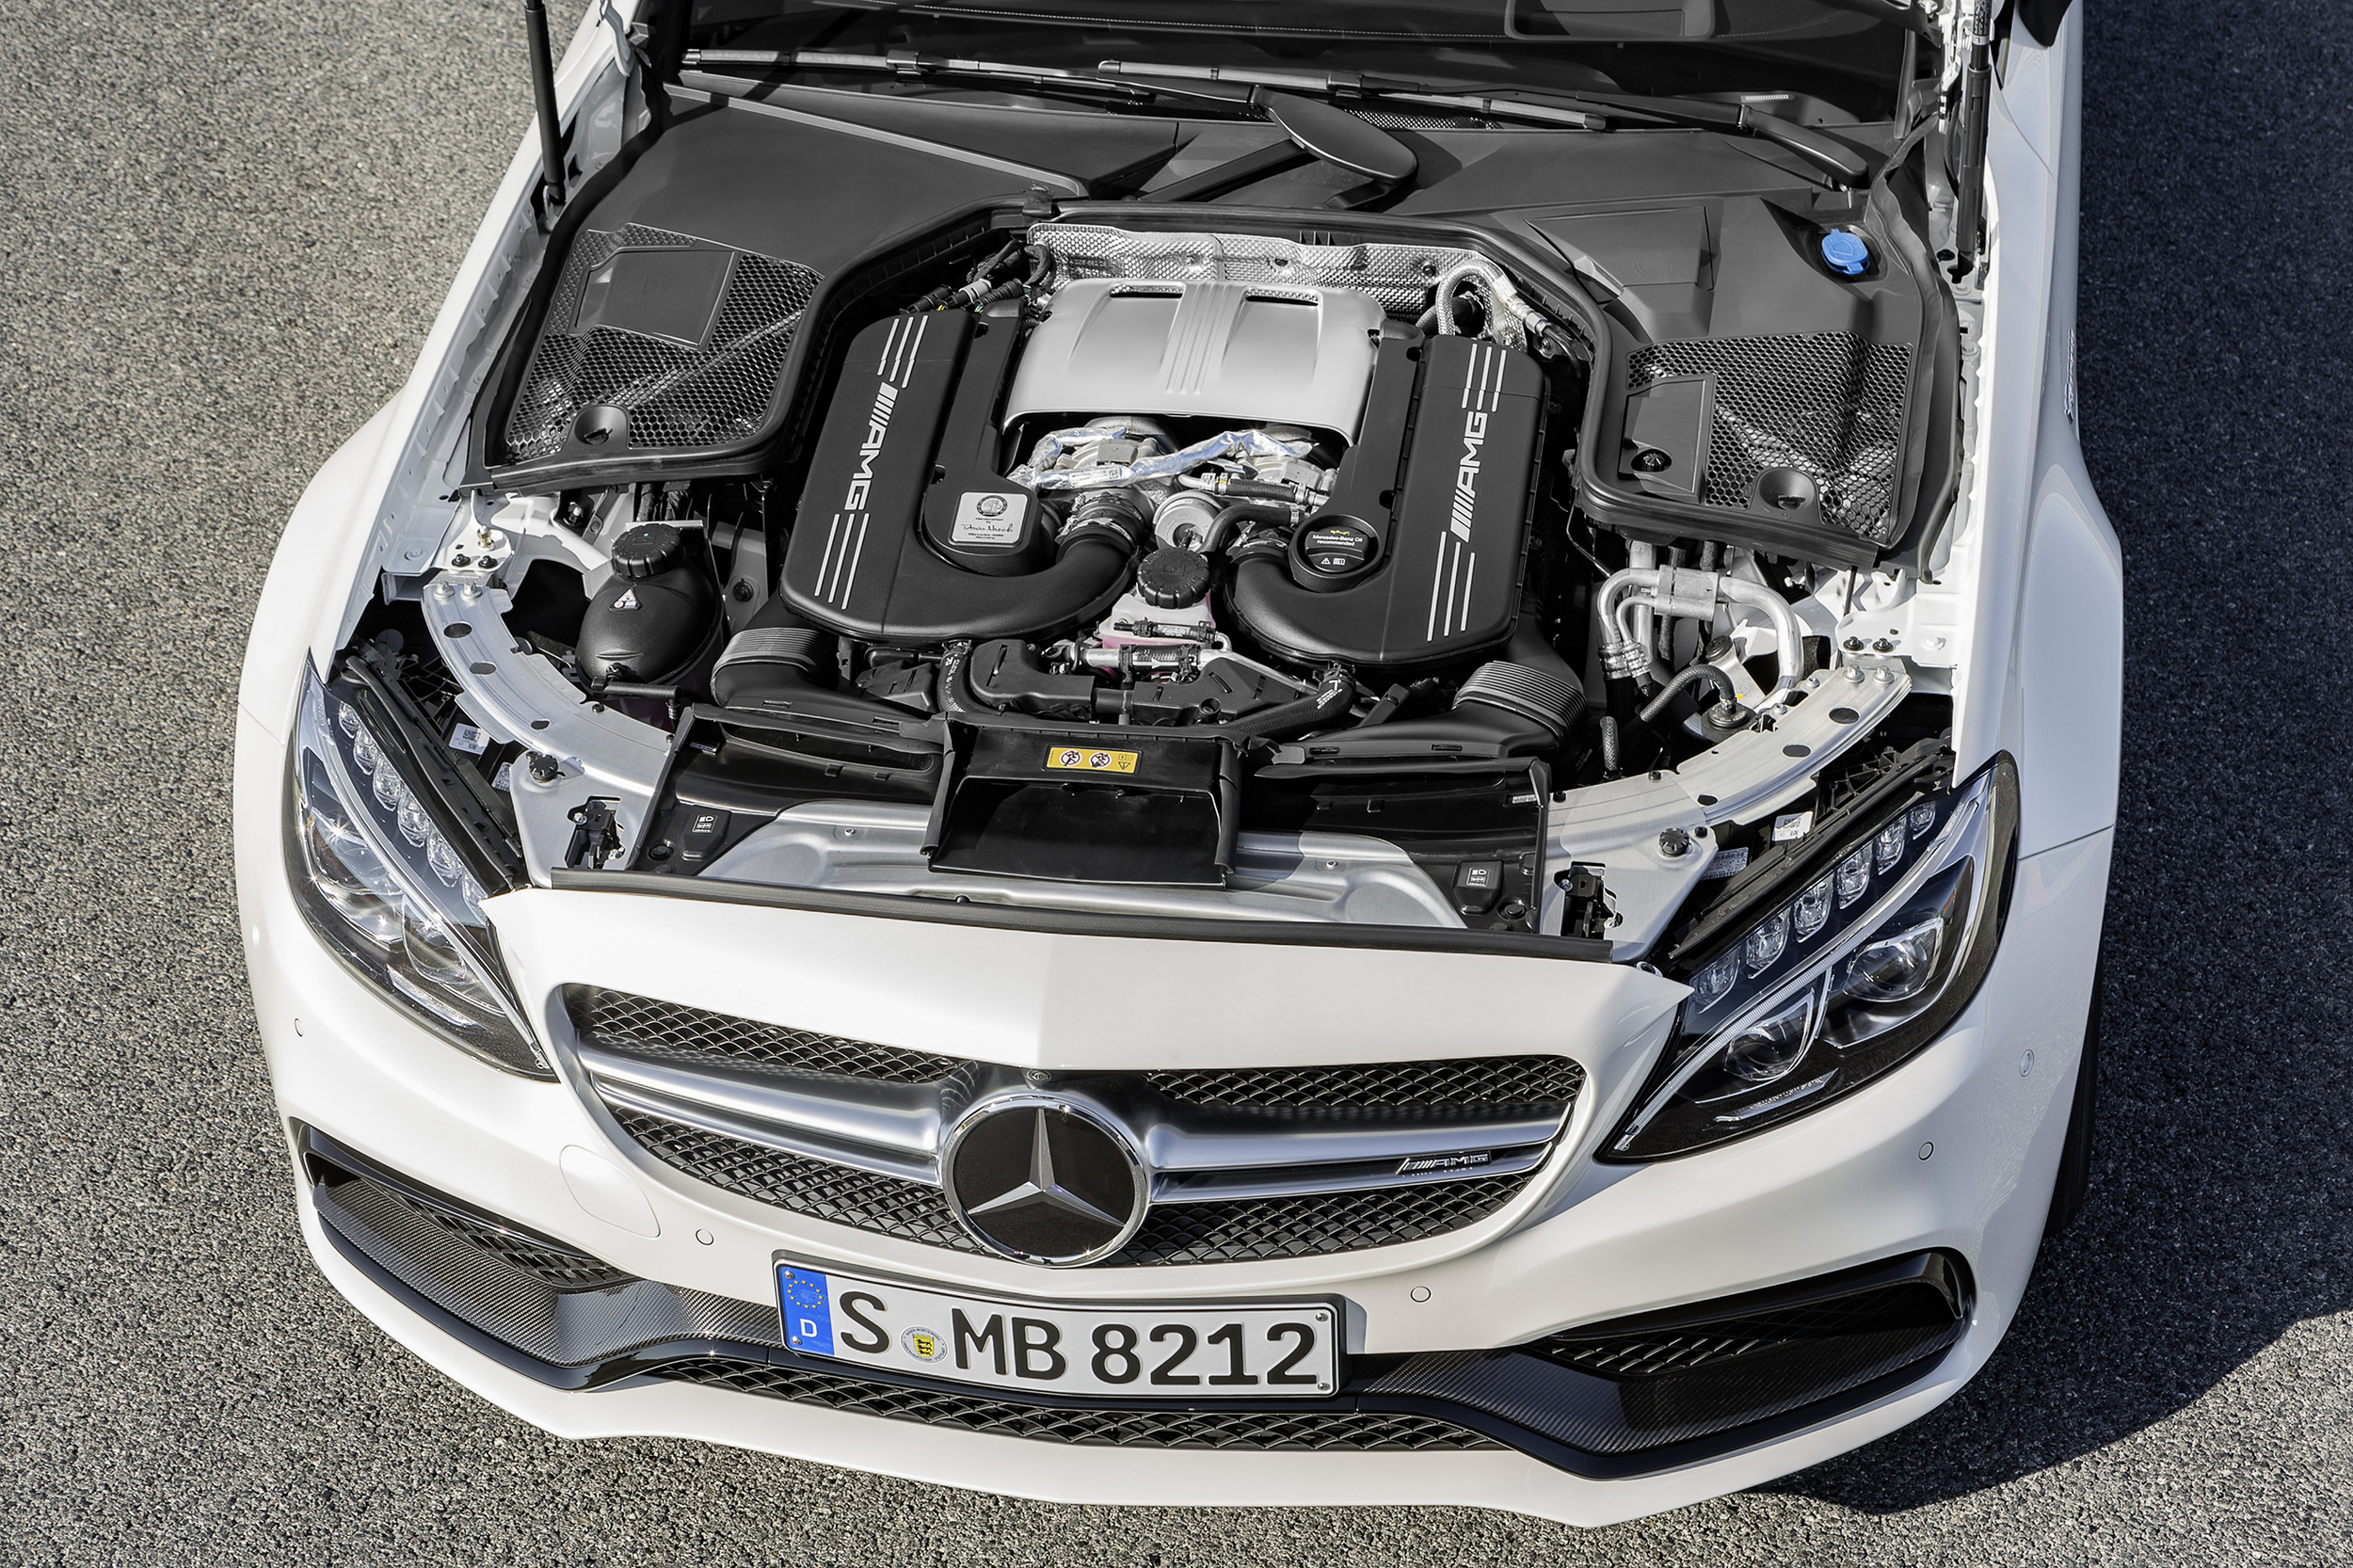 New Mercedes-AMG C 63 Coupe unveiled